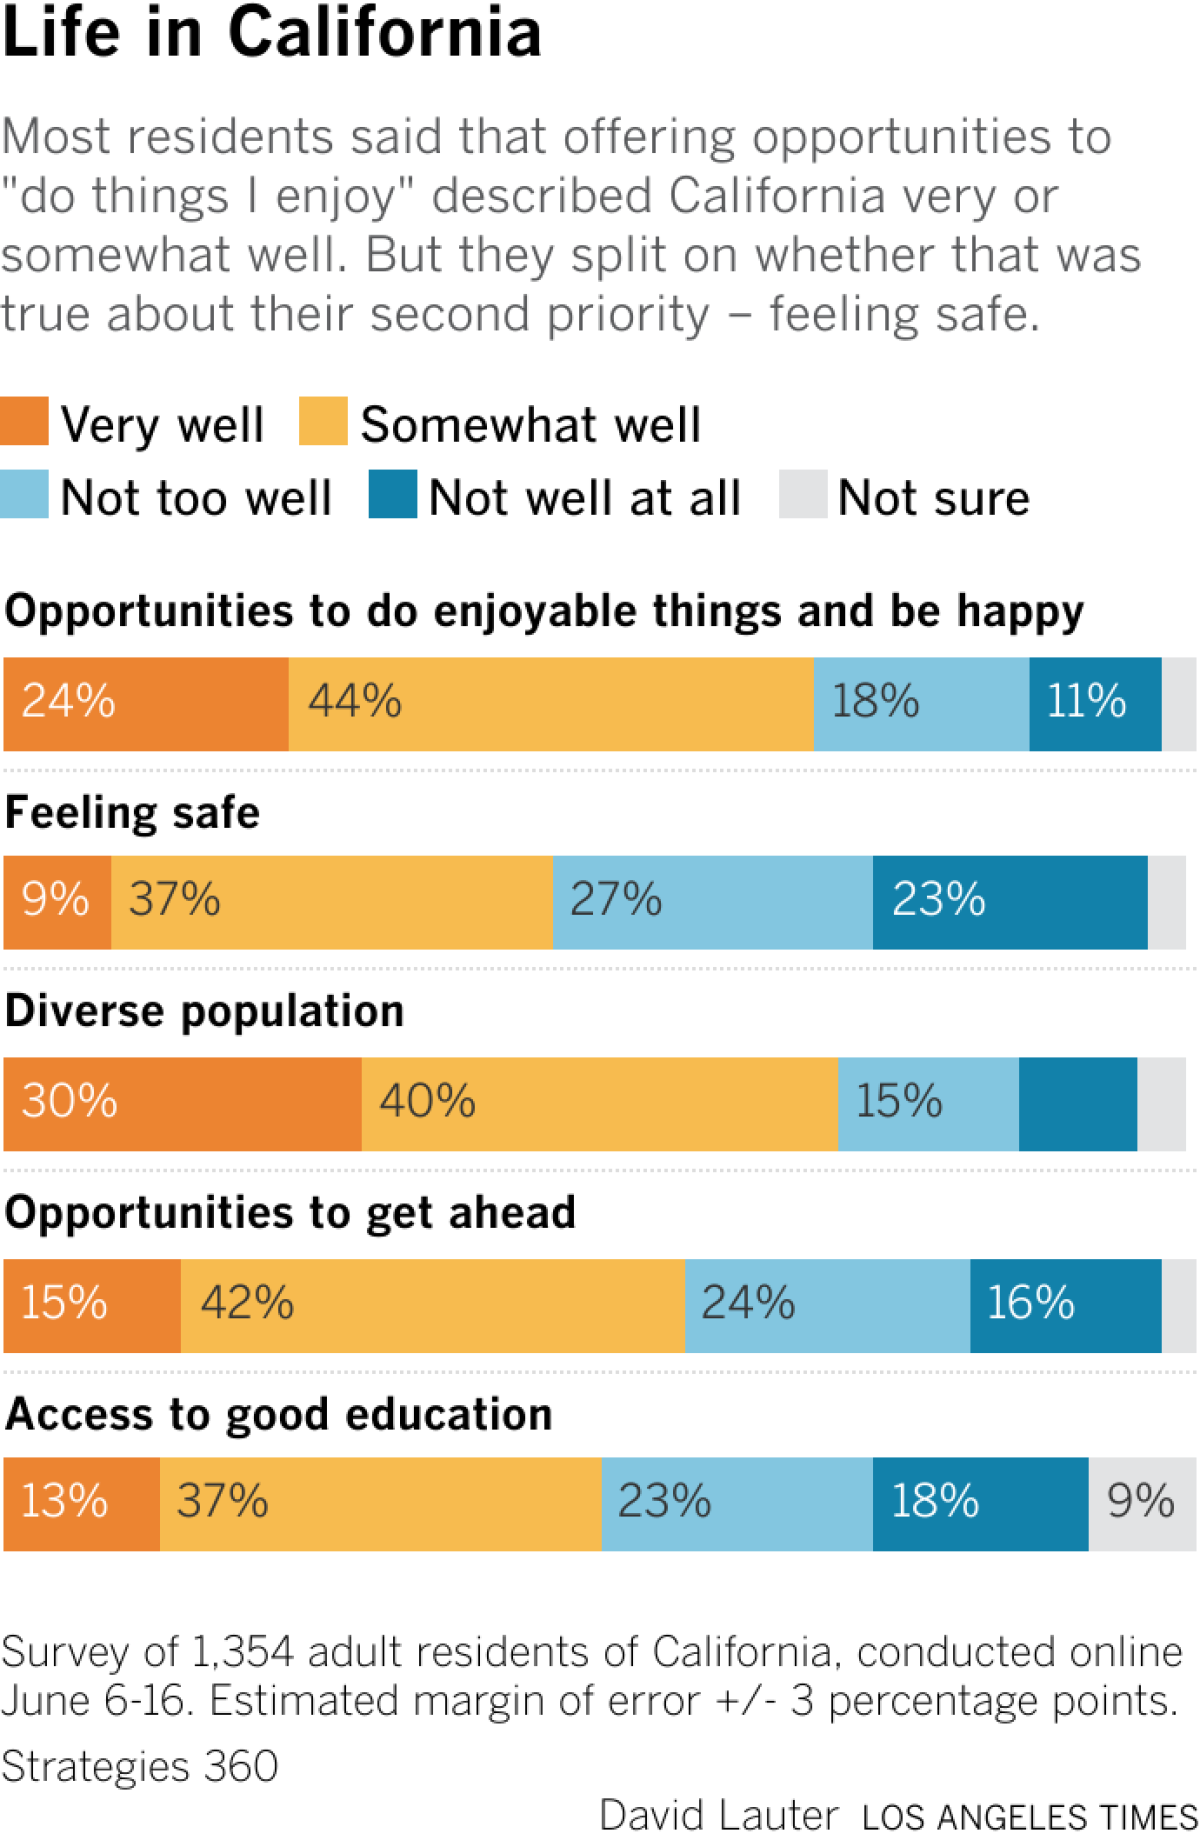 Most residents said that offering opportunities to "do things I enjoy" described California very or somewhat well. But they split on whether that was true about their second priority – feeling safe.